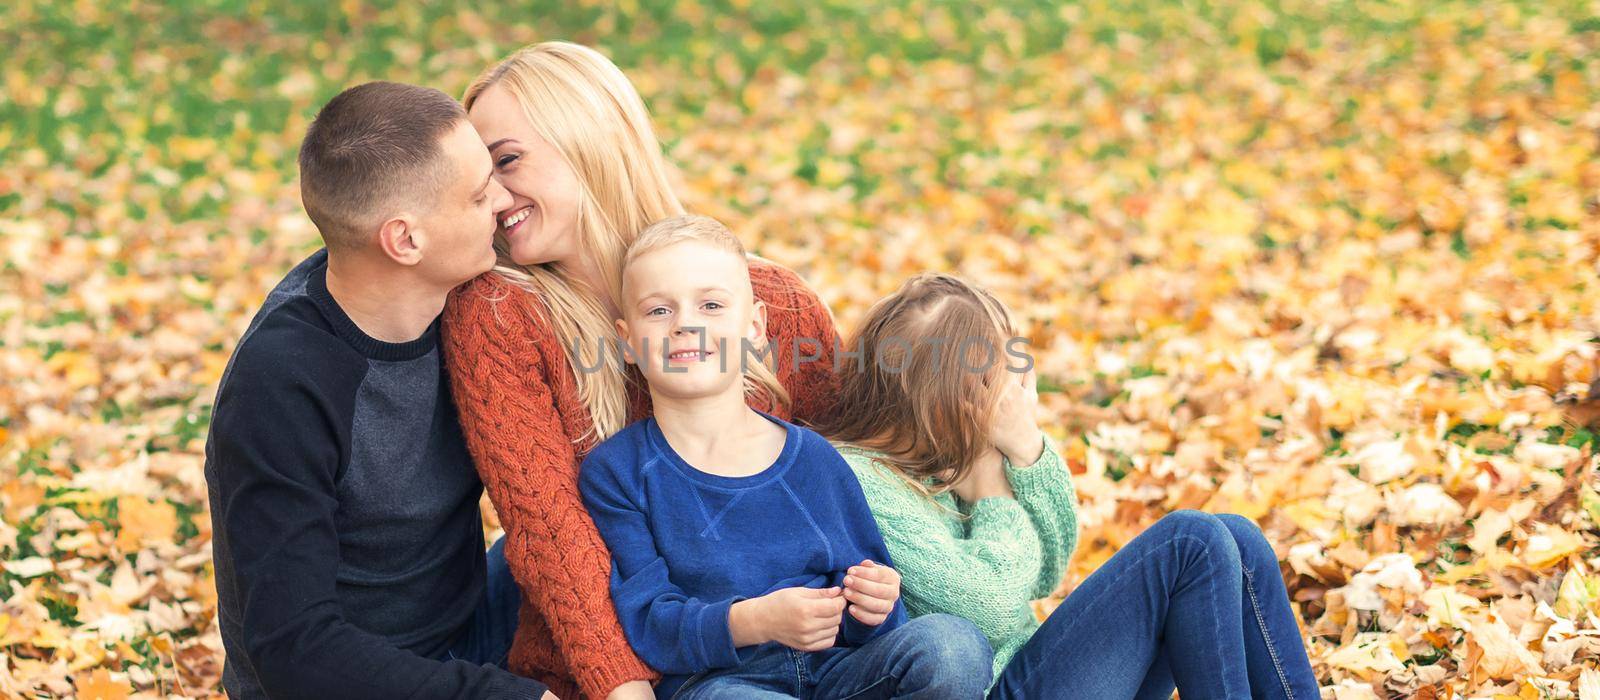 Portrait of young family sitting in autumn leaves. Parents kissing and sitting with children in the autumn park